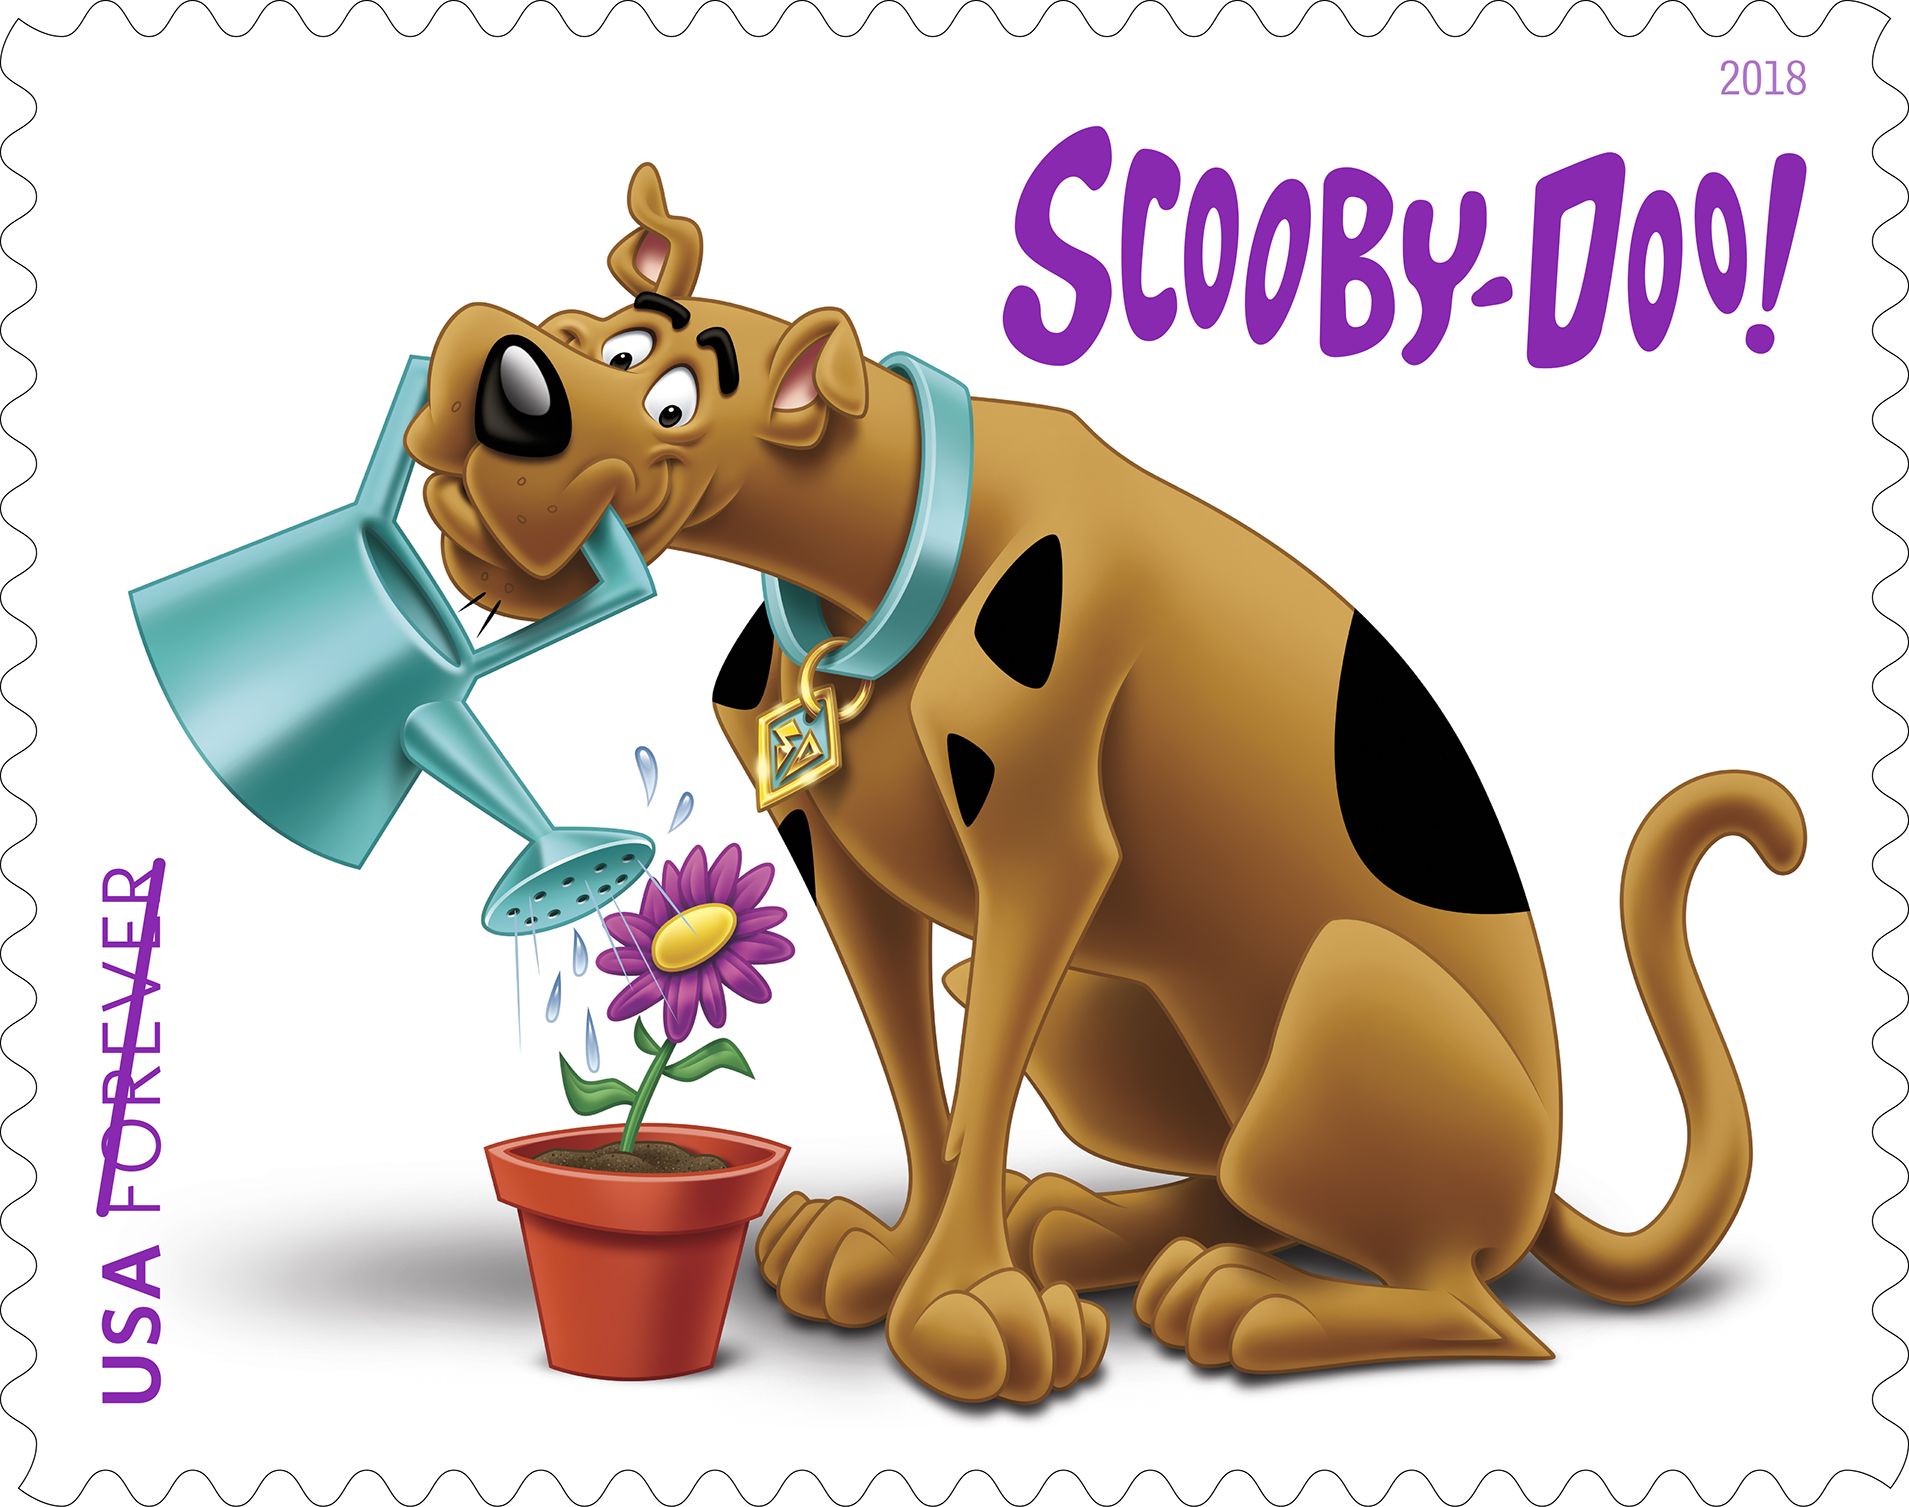 Zoinks! Everyone’s Favorite Great Dane, SCOOBY-DOO,is New Addition to the 2018 Forever Stamp Program